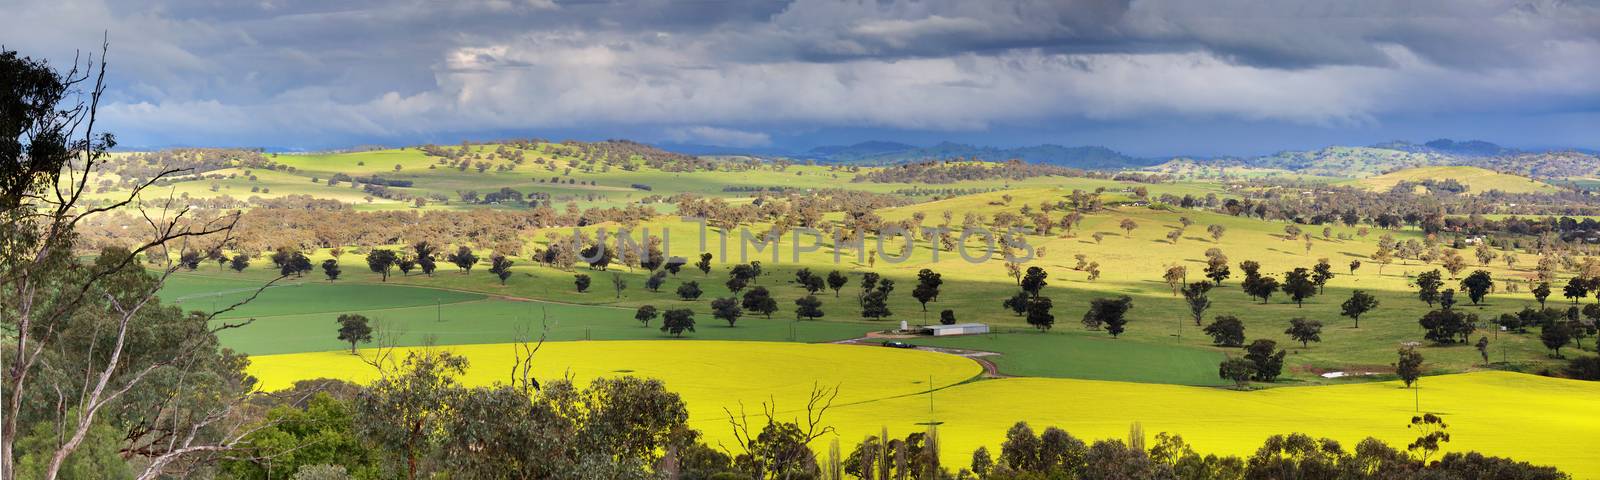 Looking down over fields of canola, wheat  and grazing pastures with menacing storm clouds looming overhead and offering large downpours of heavy rain intermittently.  NSW,Australia  Shot at 1250 iso.